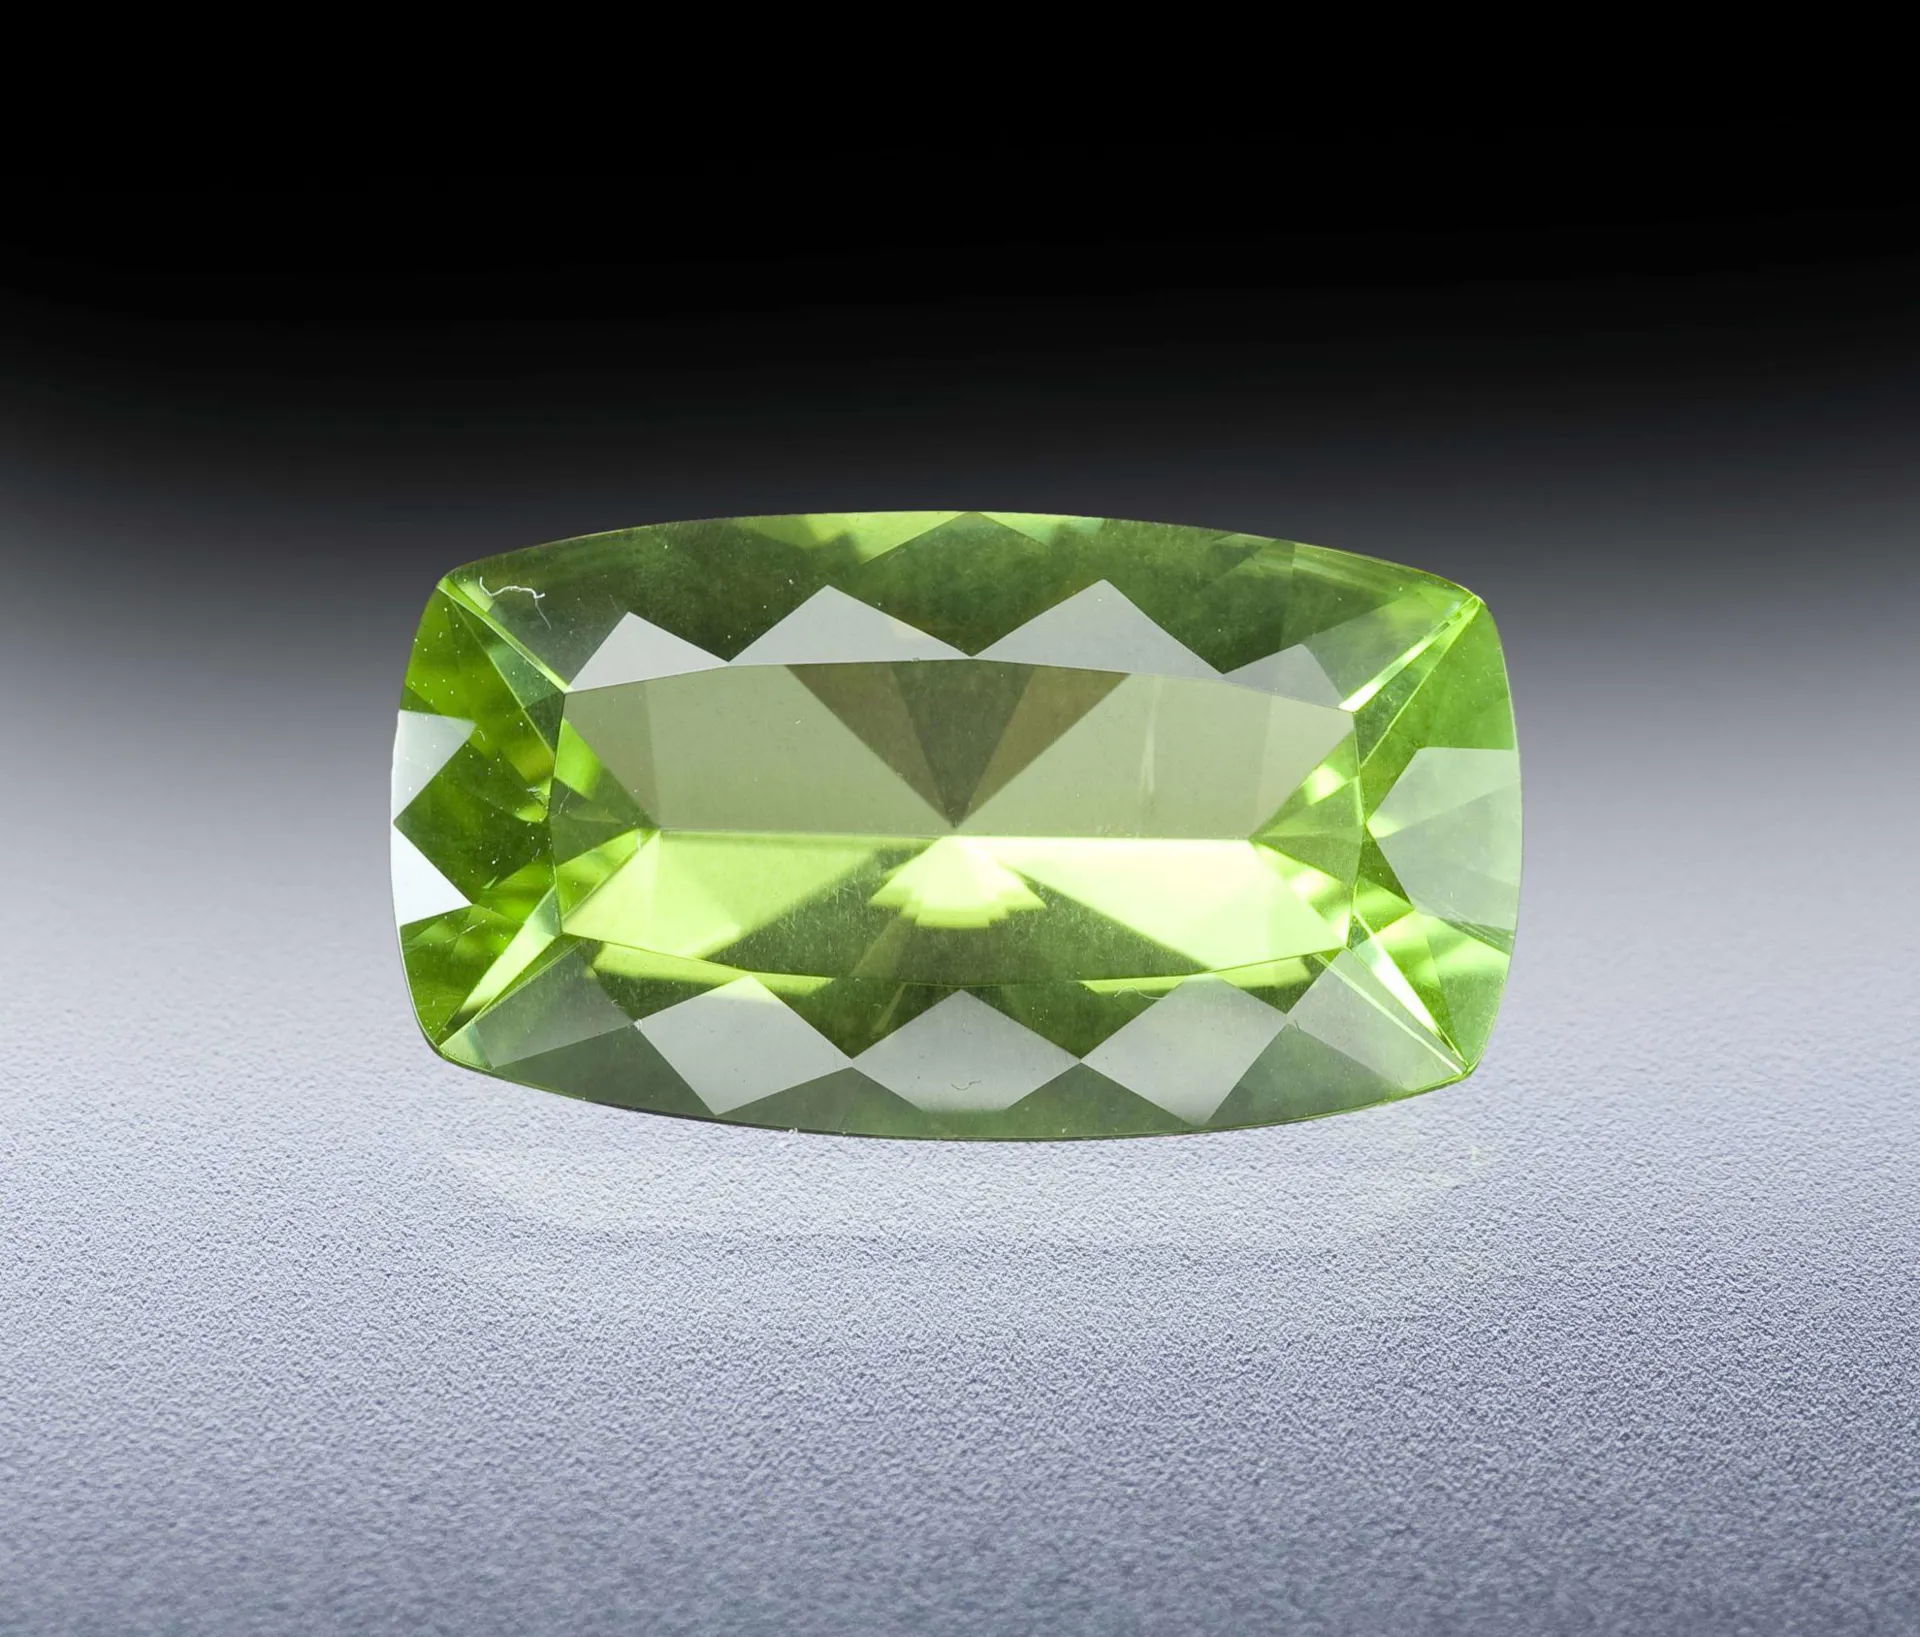 Peridot Value, Price, and Jewelry Information